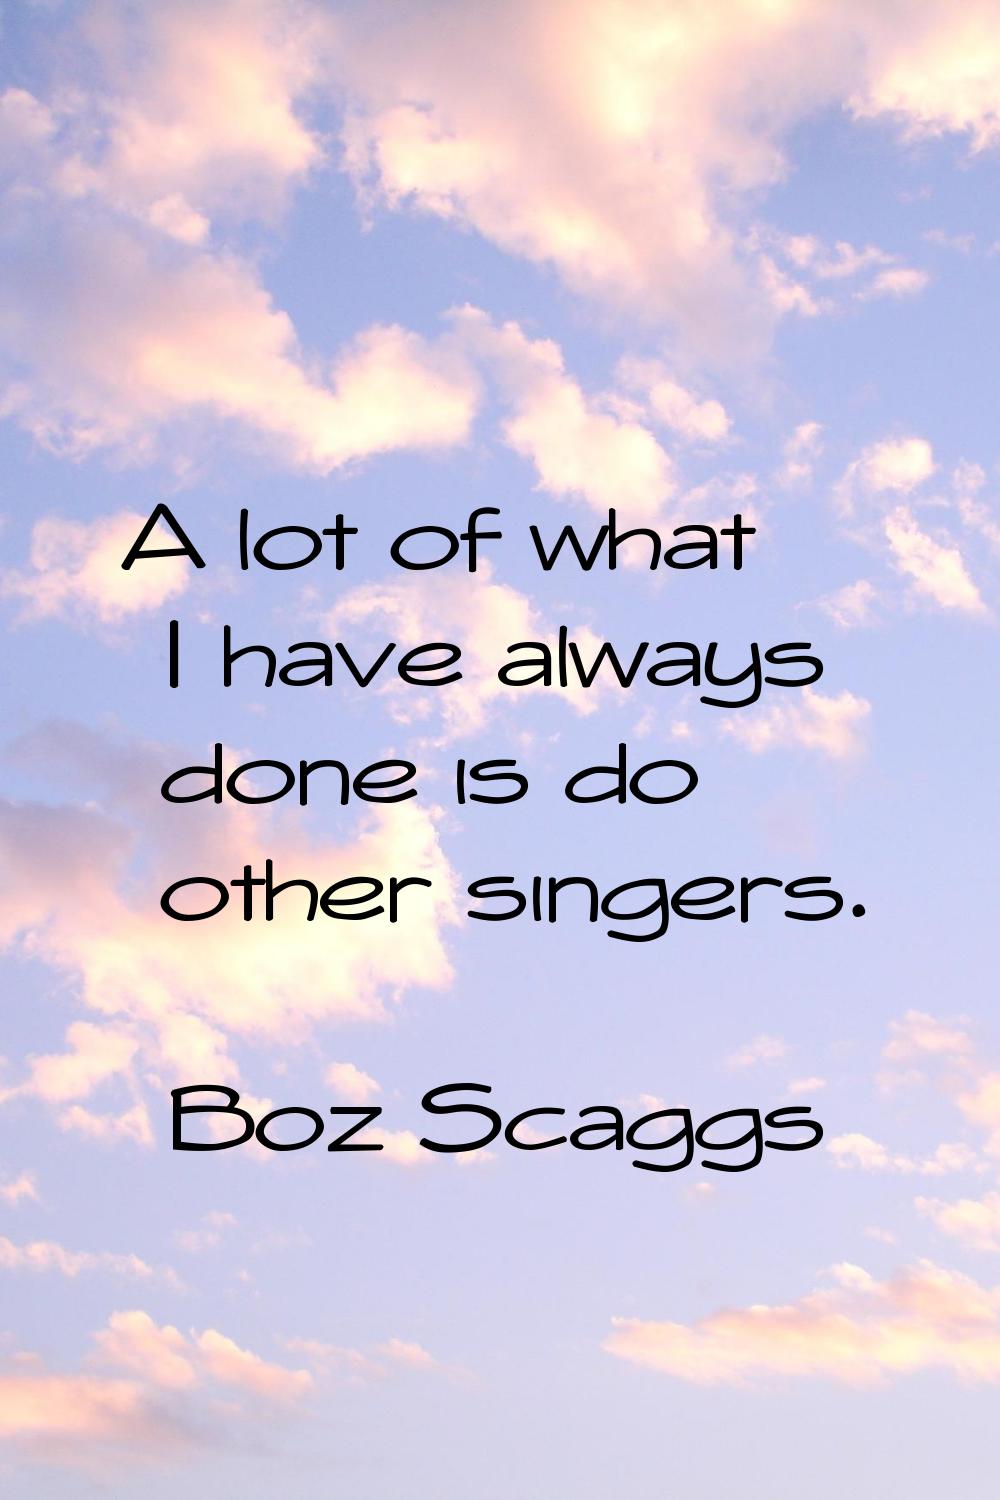 A lot of what I have always done is do other singers.